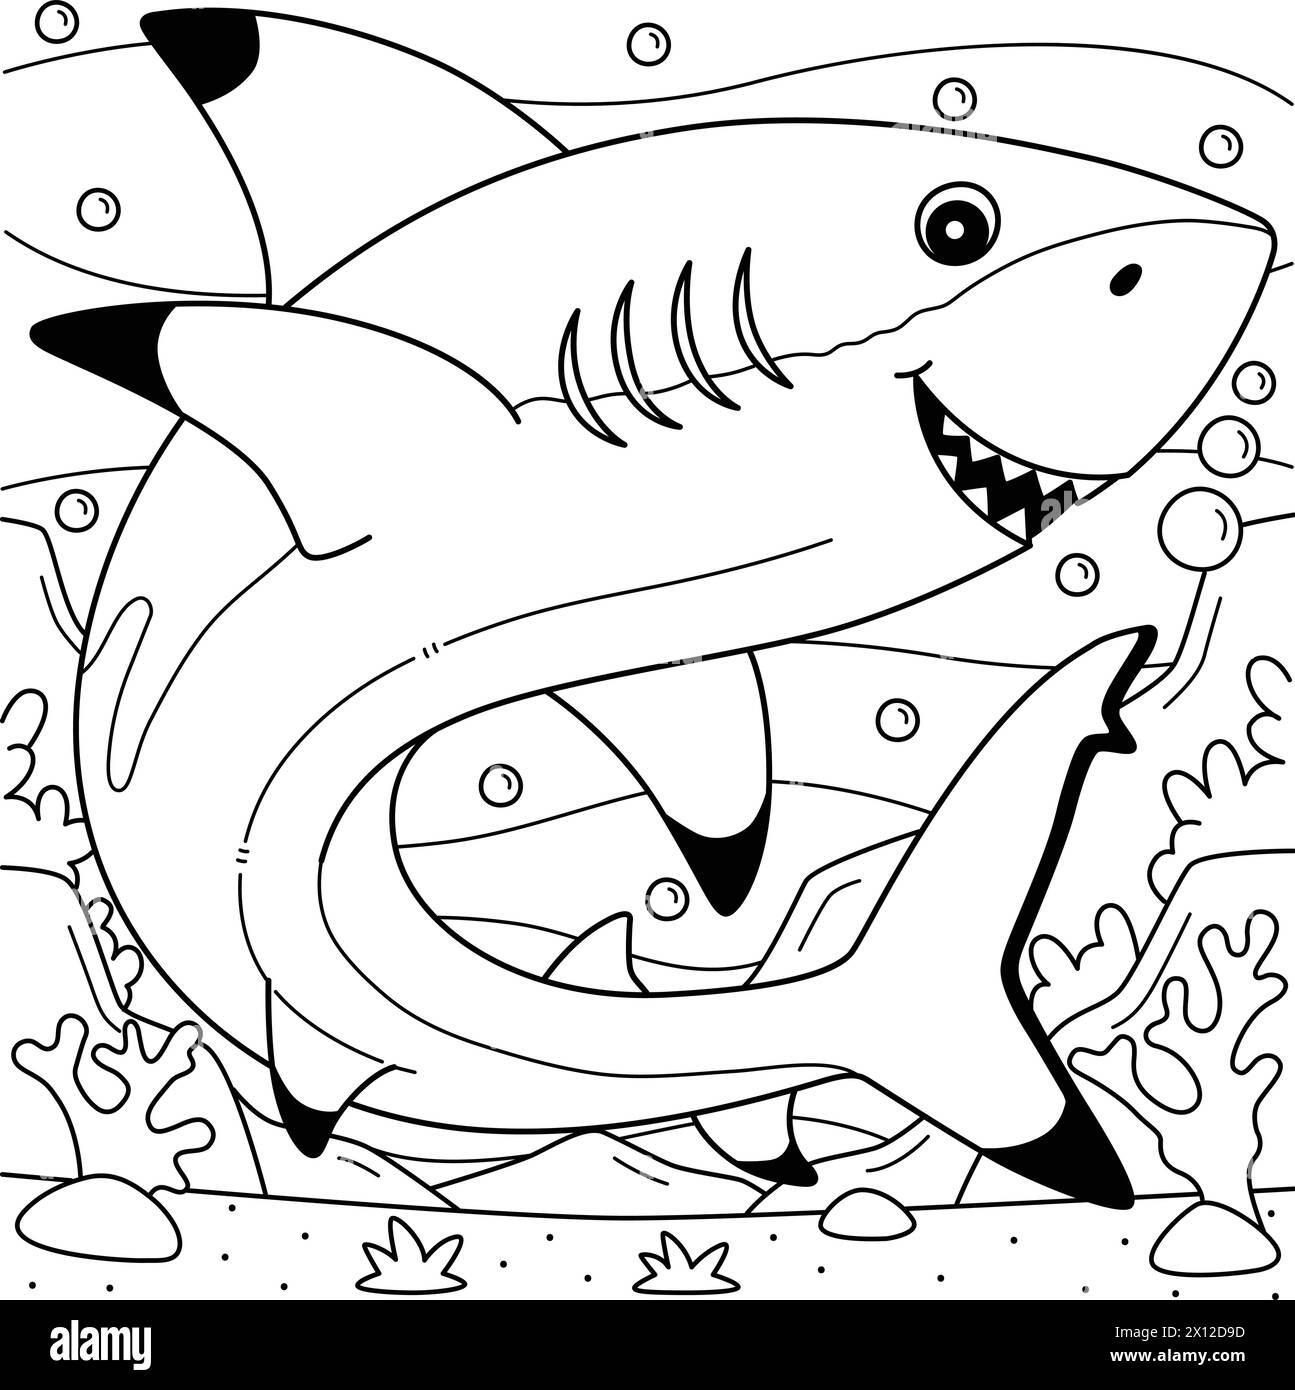 Blacktip Shark Coloring Page for Kids Stock Vector